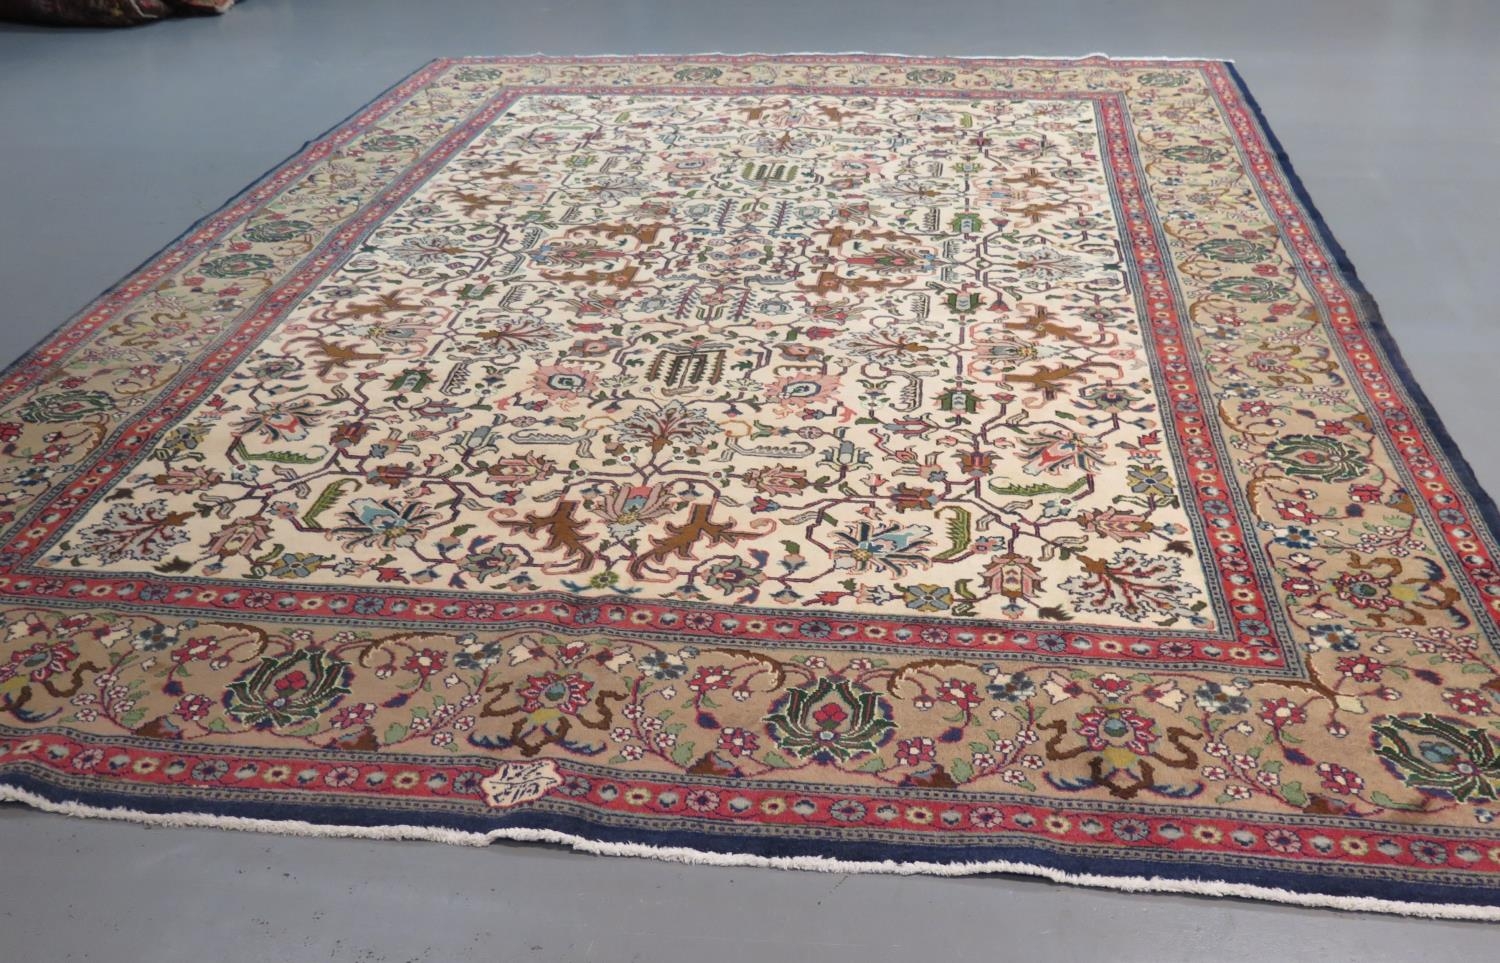 Fine Tabriz carpet, signed by Master Weaver Javan - Persia�Circa. 1930sSize. 3.20 x 2.28 metres - Image 4 of 4